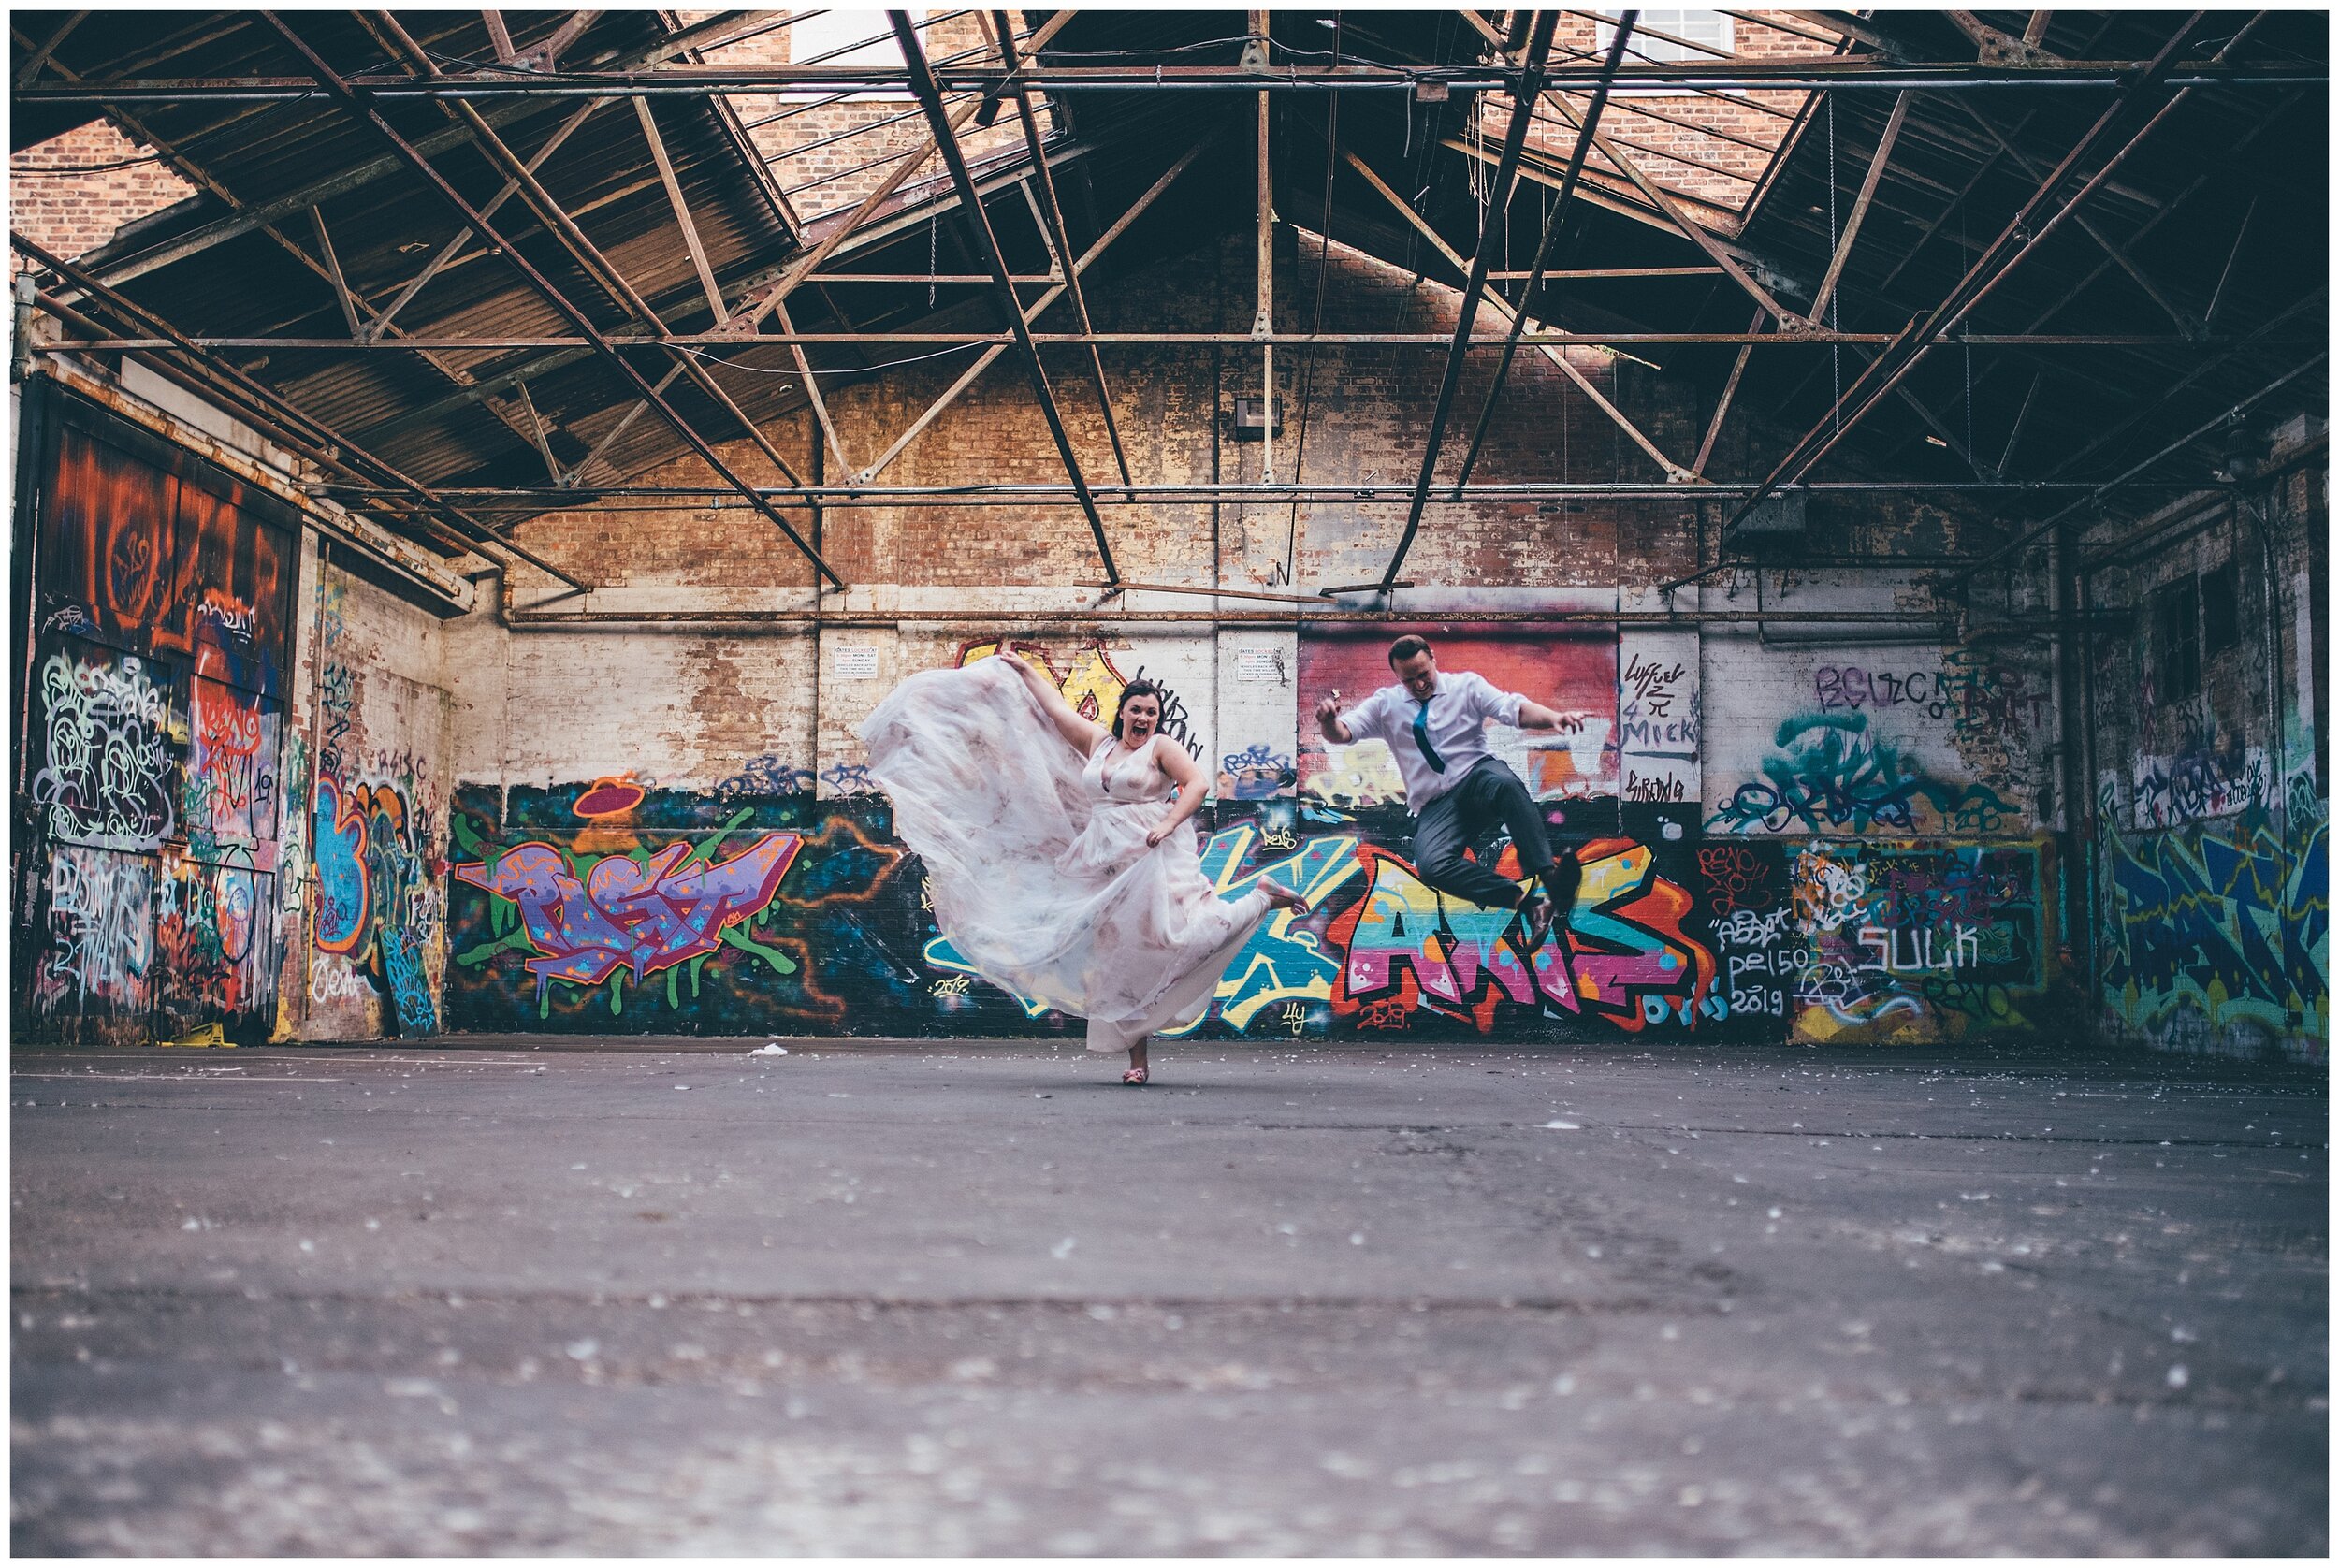 Newlyweds have playful and colourful wedding photographs in graffiti car park in Chester.